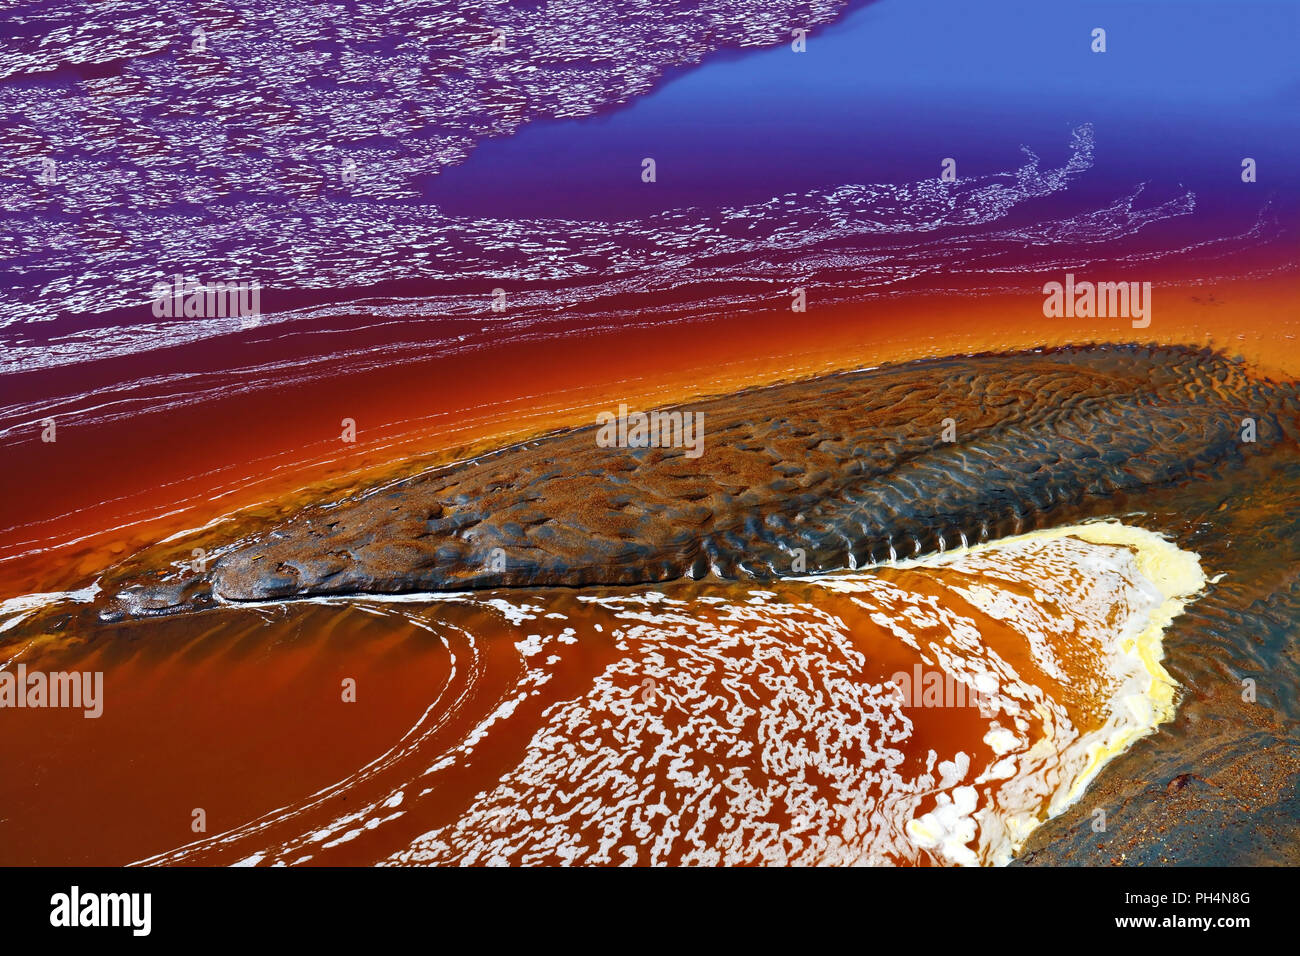 Amazing colors and textures of the water and mud of the Odiel river, in the province of Huelva, Spain Stock Photo